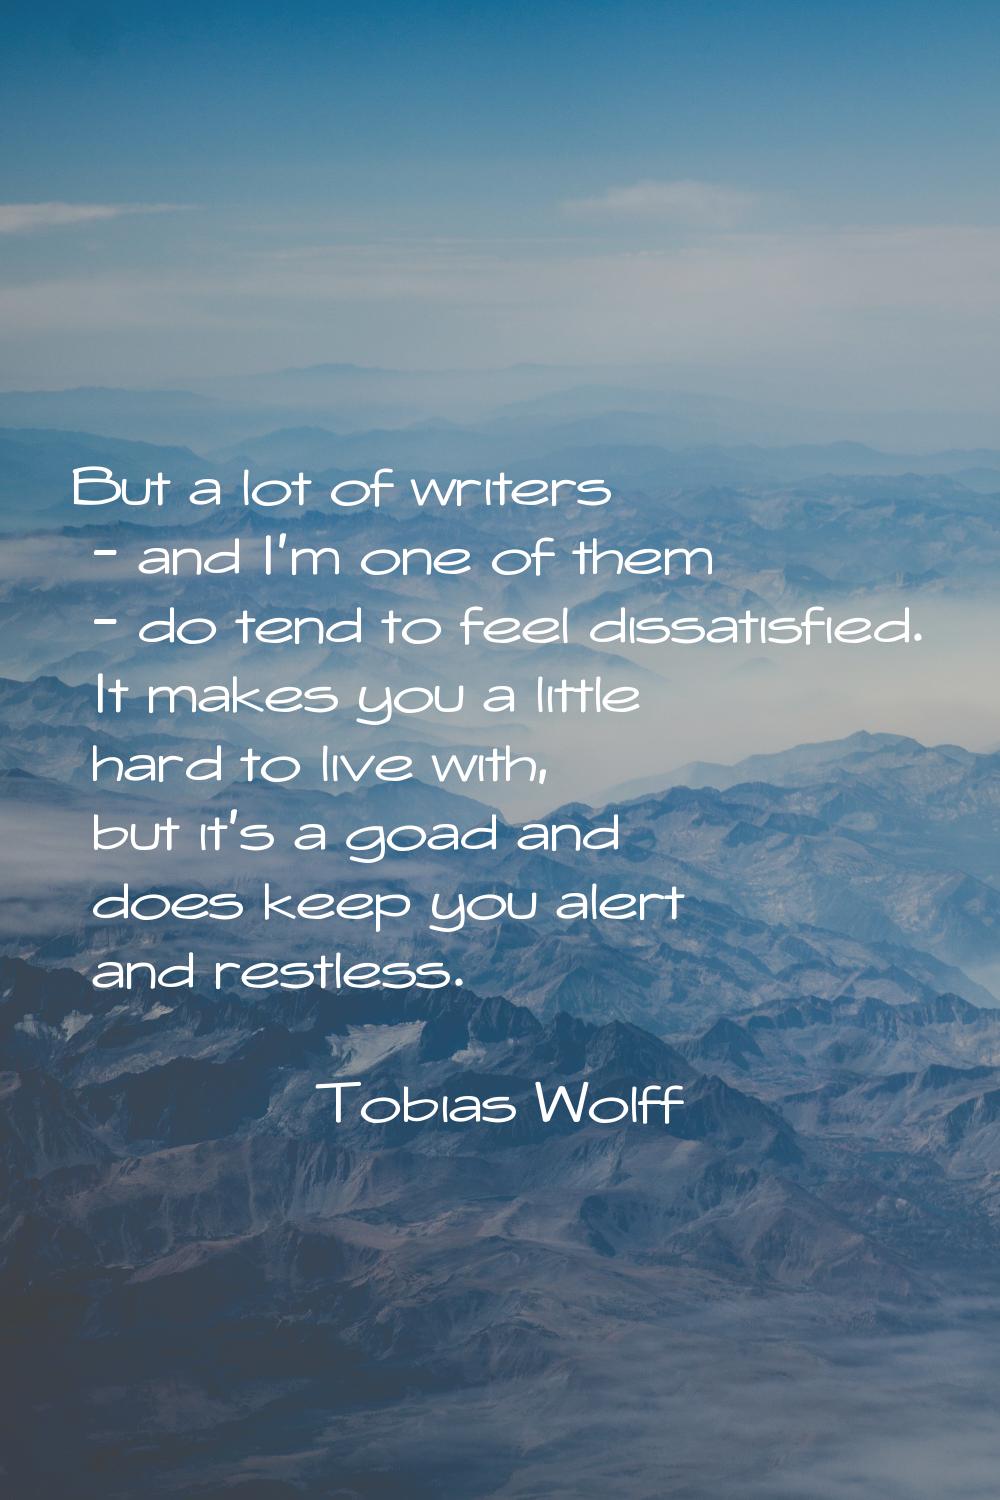 But a lot of writers - and I'm one of them - do tend to feel dissatisfied. It makes you a little ha